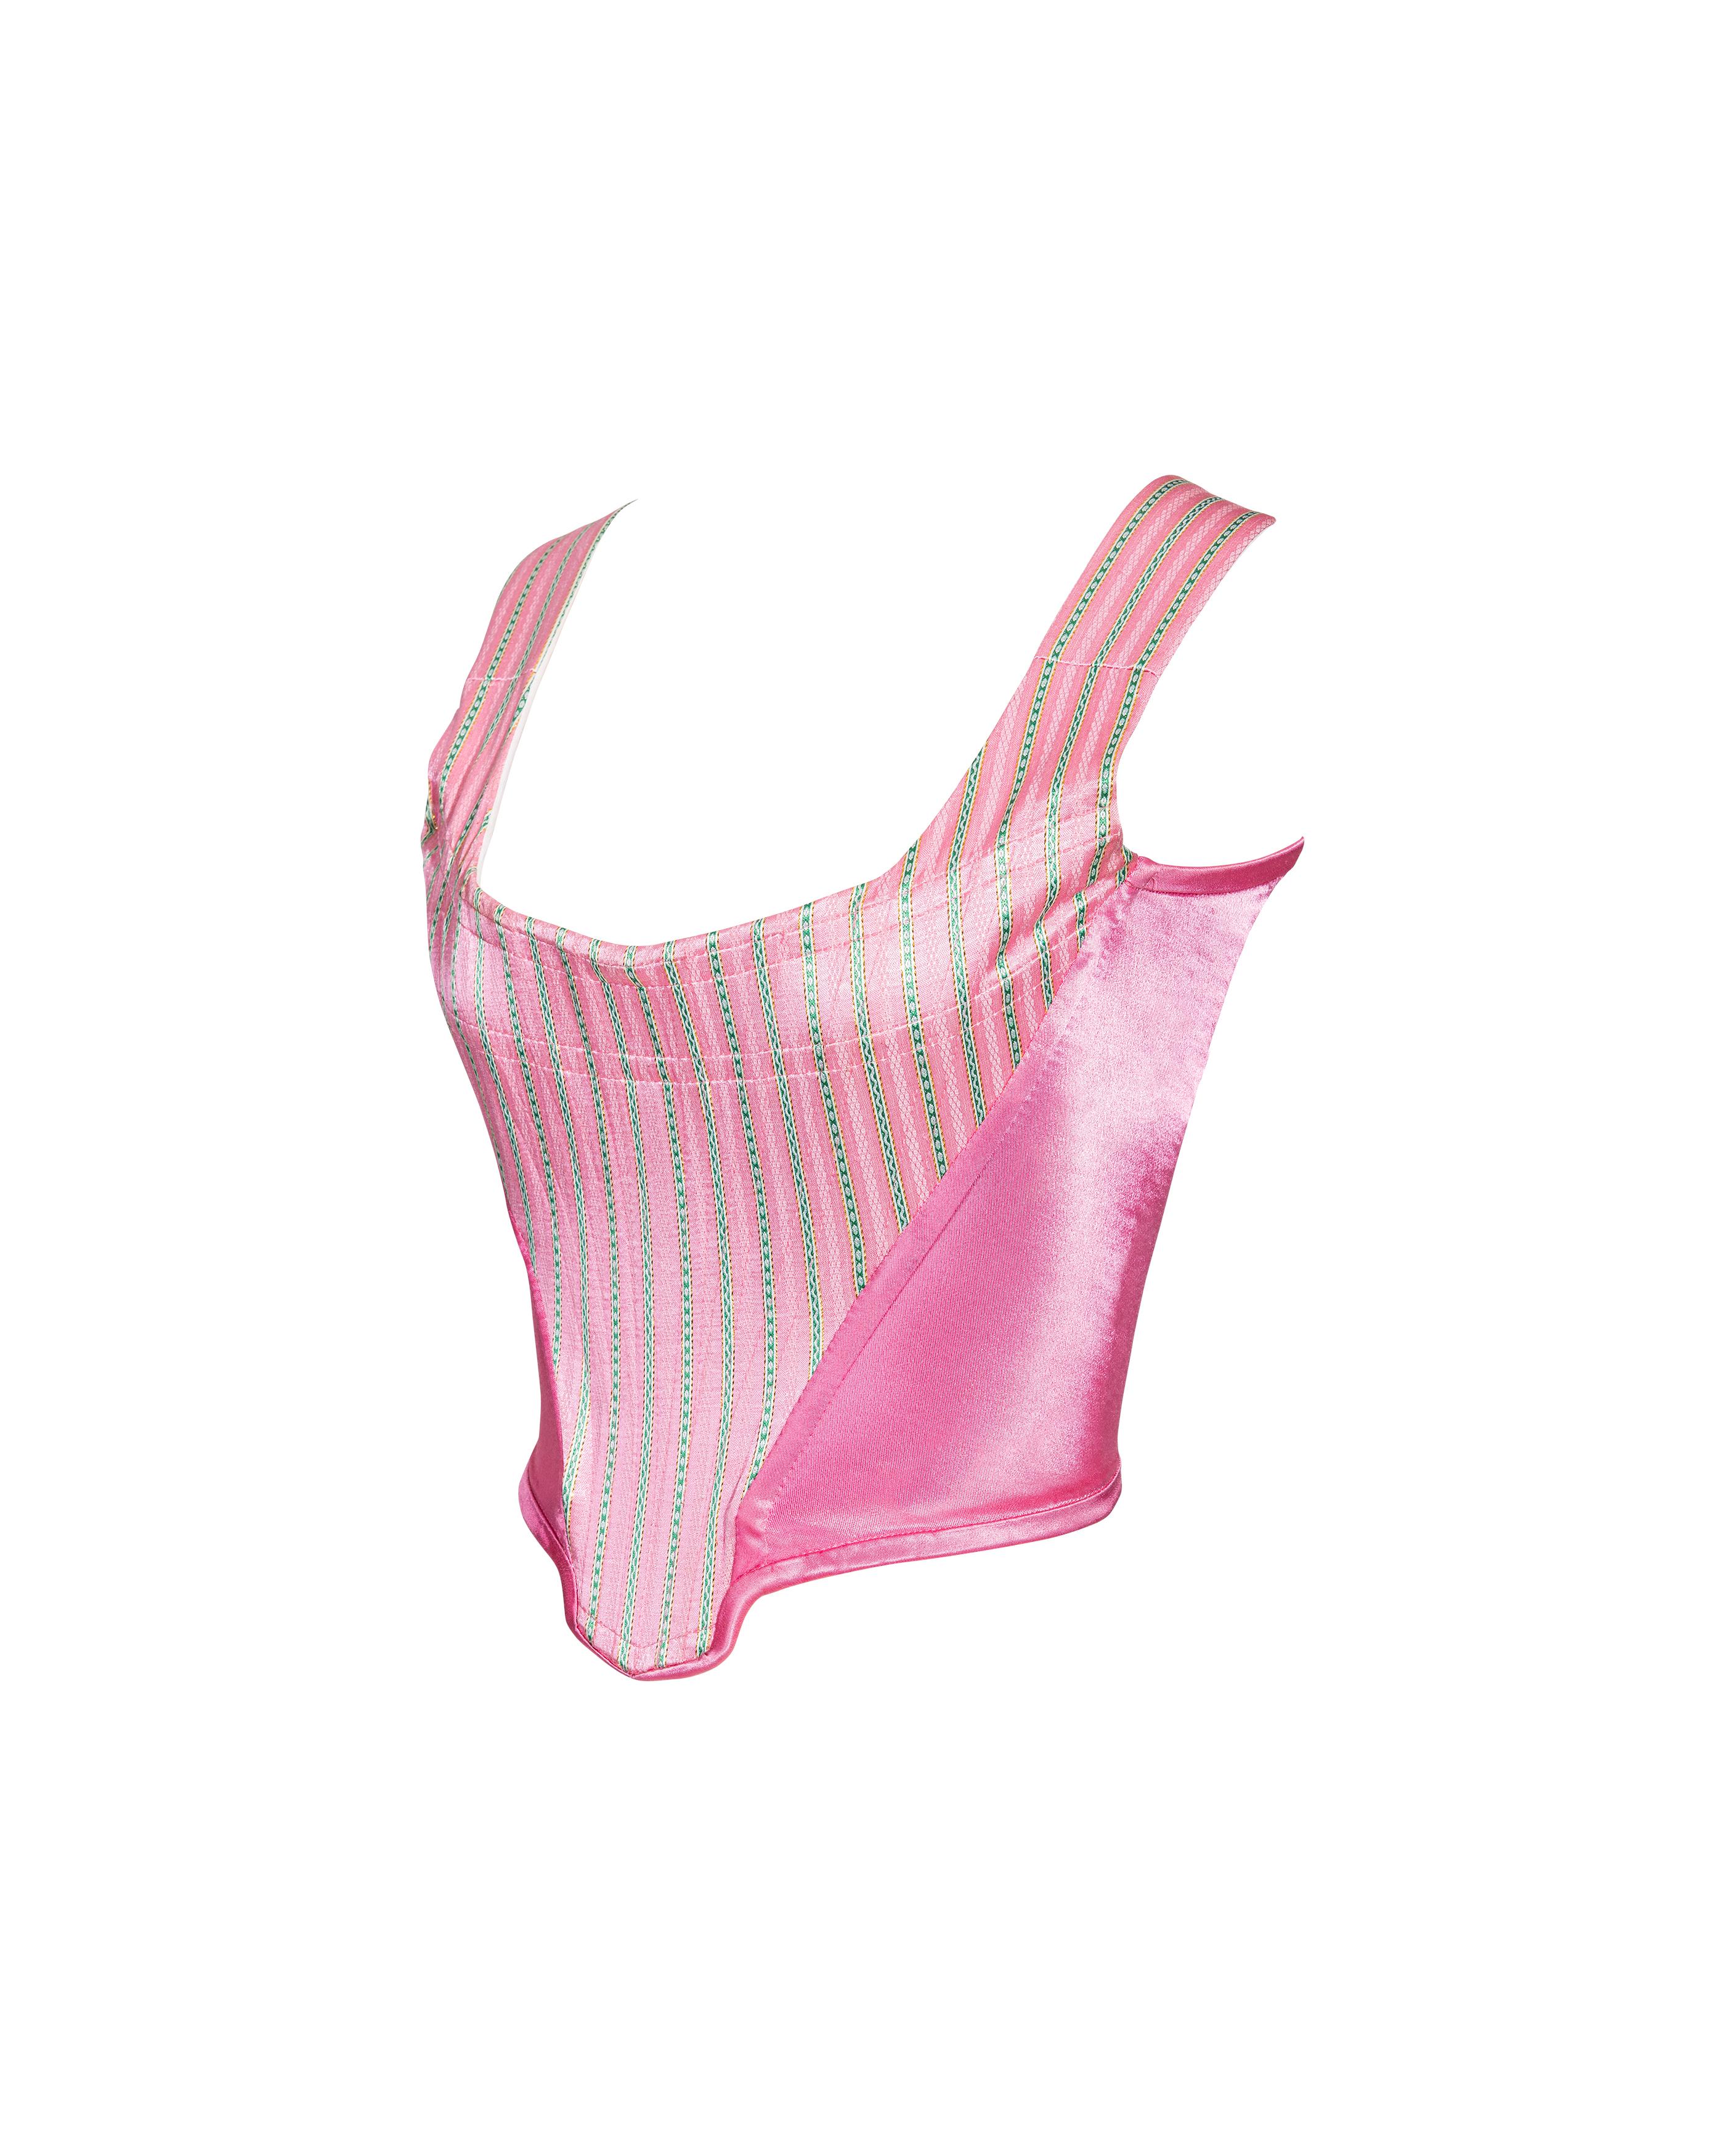 A/W 1991 Vivienne Westwood 'Dressing Up' Pink and Green Striped Corset In Excellent Condition For Sale In North Hollywood, CA